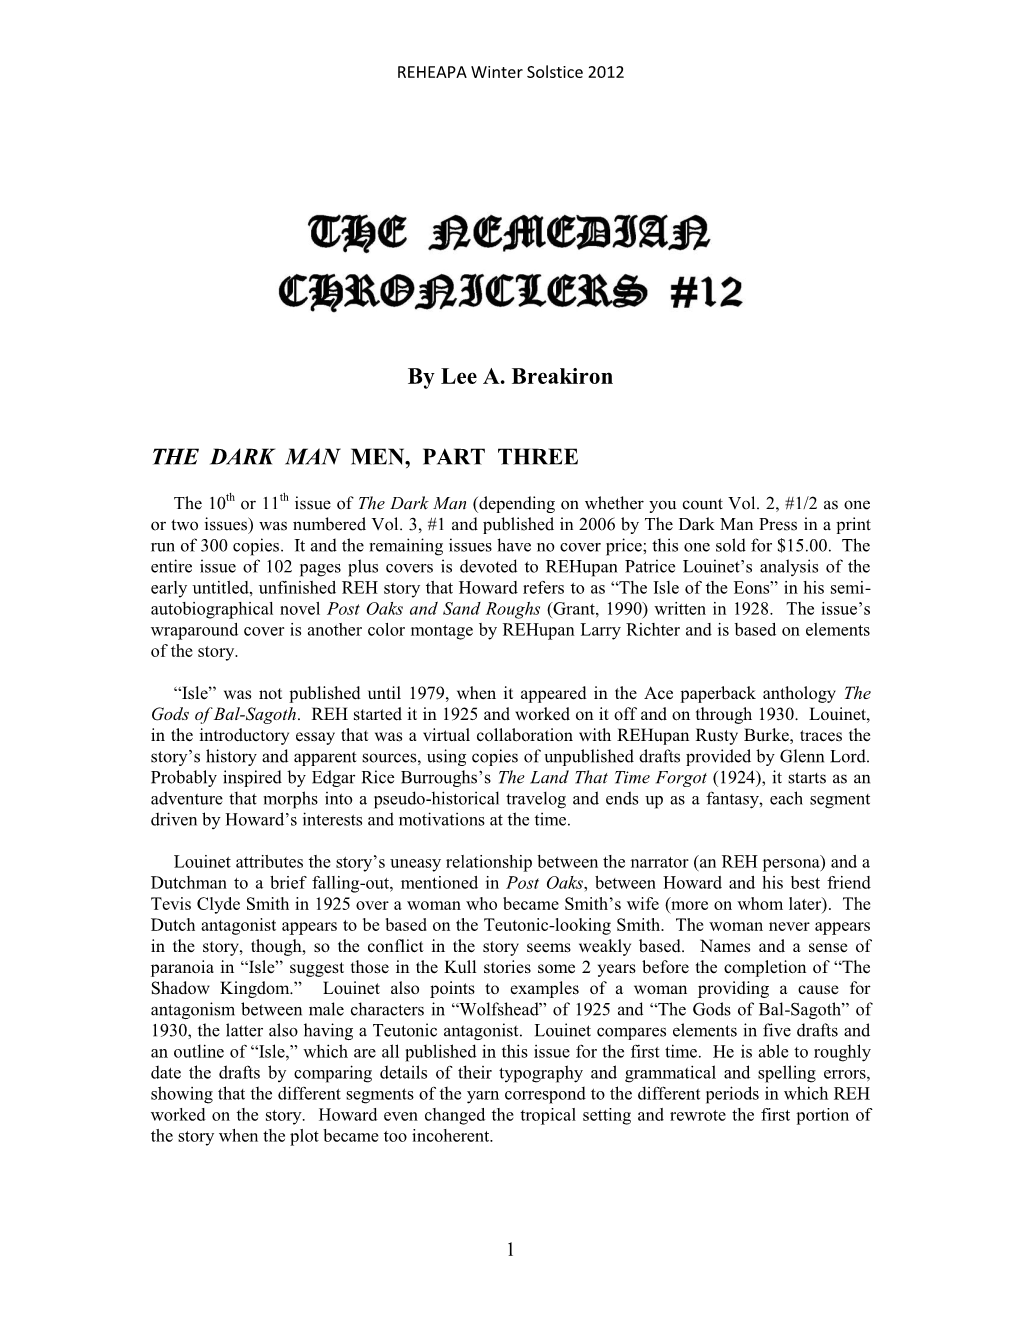 The Nemedian Chroniclers #12 [WS12]